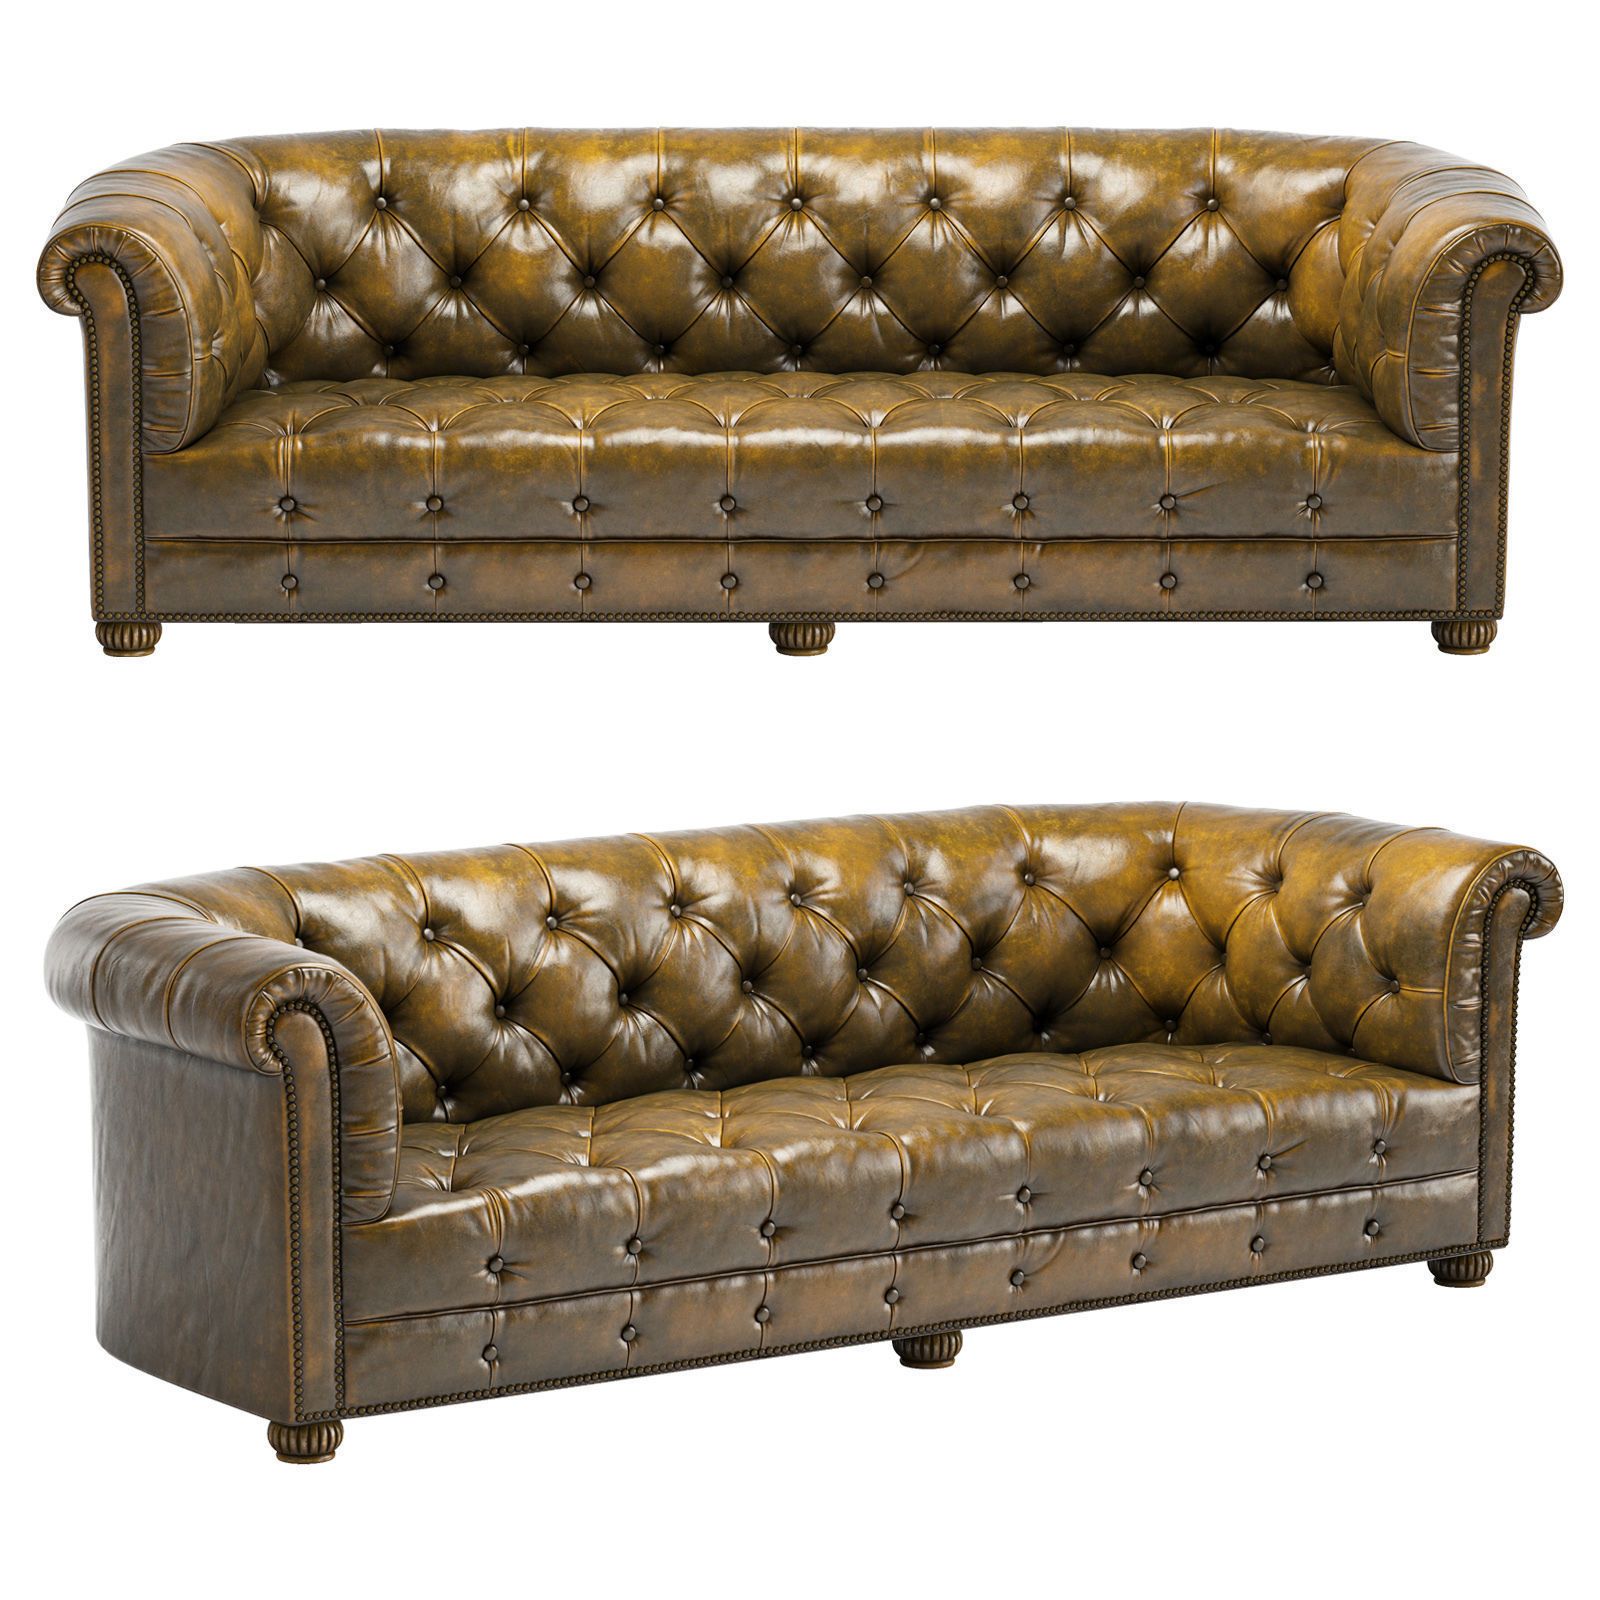 3D Antique Chesterfield Sofa | Cgtrader For Vintage Chesterfield Sofas (View 1 of 15)